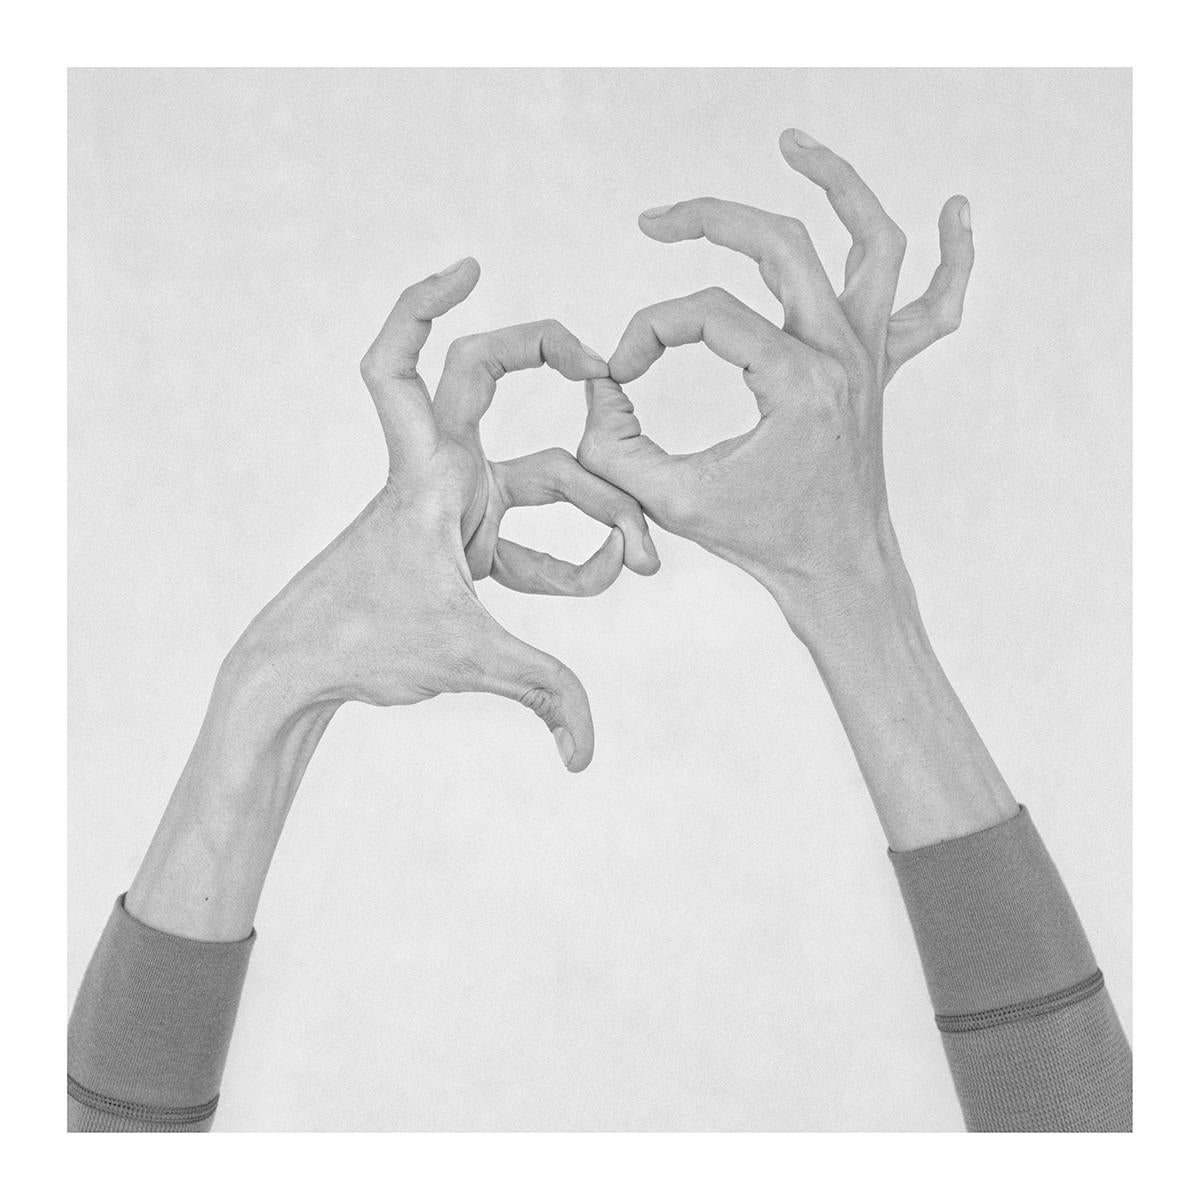 Nico Baixas / Gos-com-fuig Black and White Photograph - Untitled X. From the Series Chiromorphose. Hands. Black & White Photography